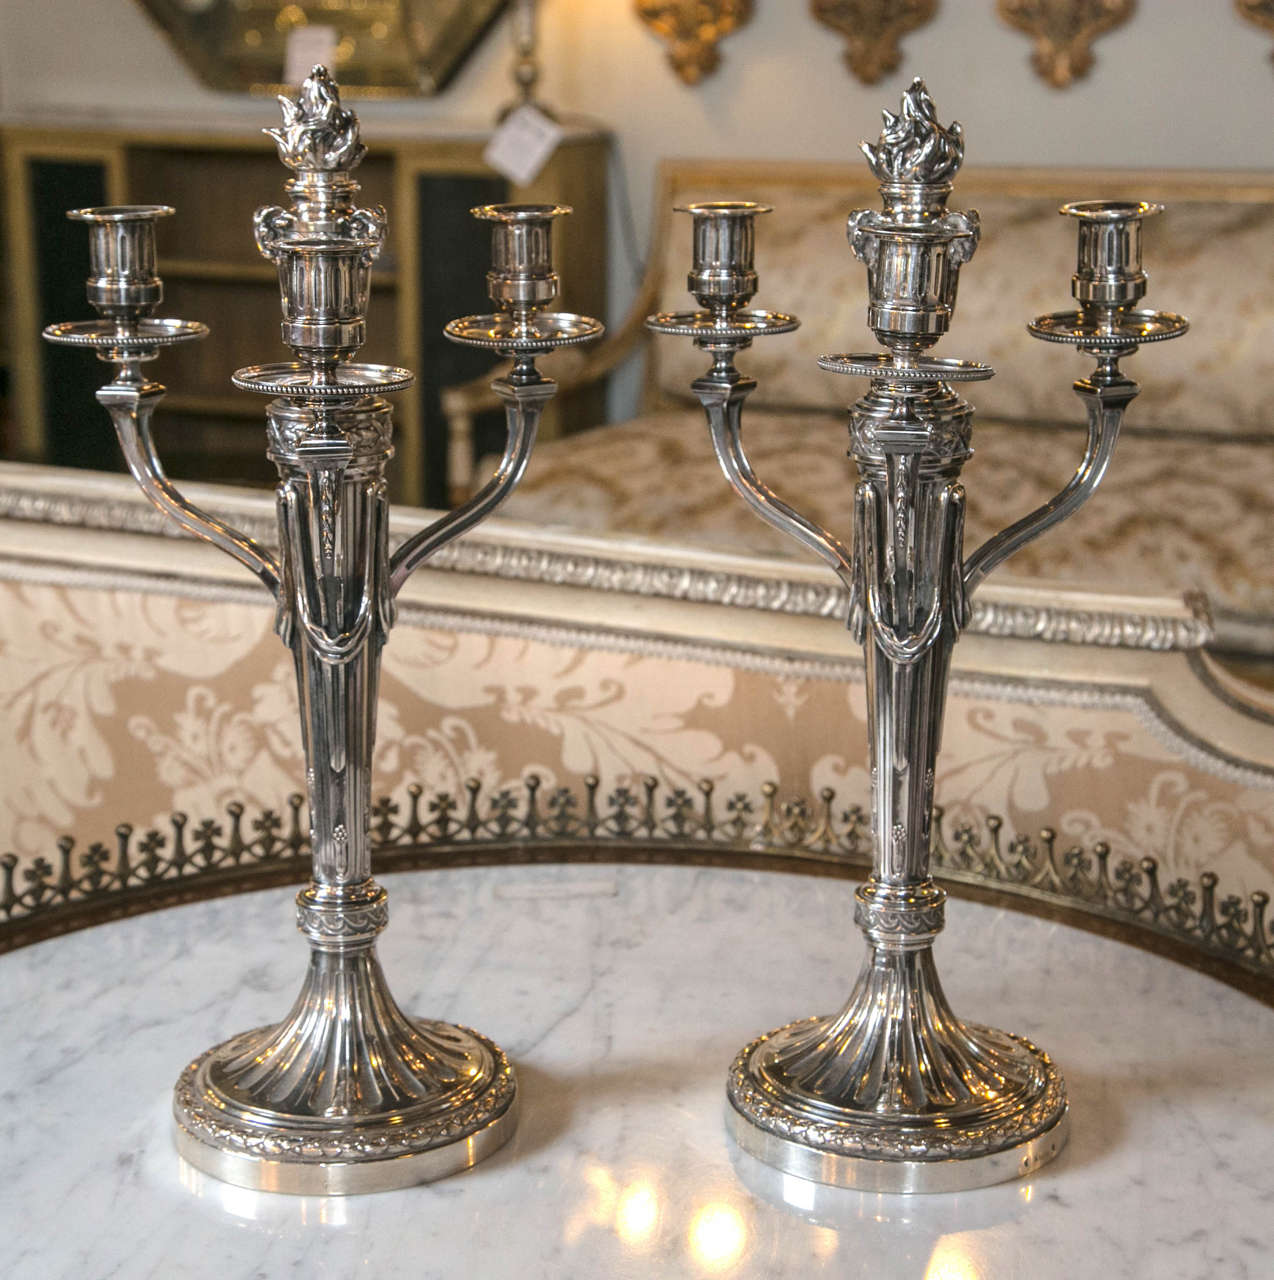 Pair of Andre Aucoc French Continental candelabras, 1887-1911. Each Stamped on Base with Maker's Mark - Finely detailed and solid pair that will add shimmering warmth and beauty to all of your dining or evening events. 

Andre Aucoc known for